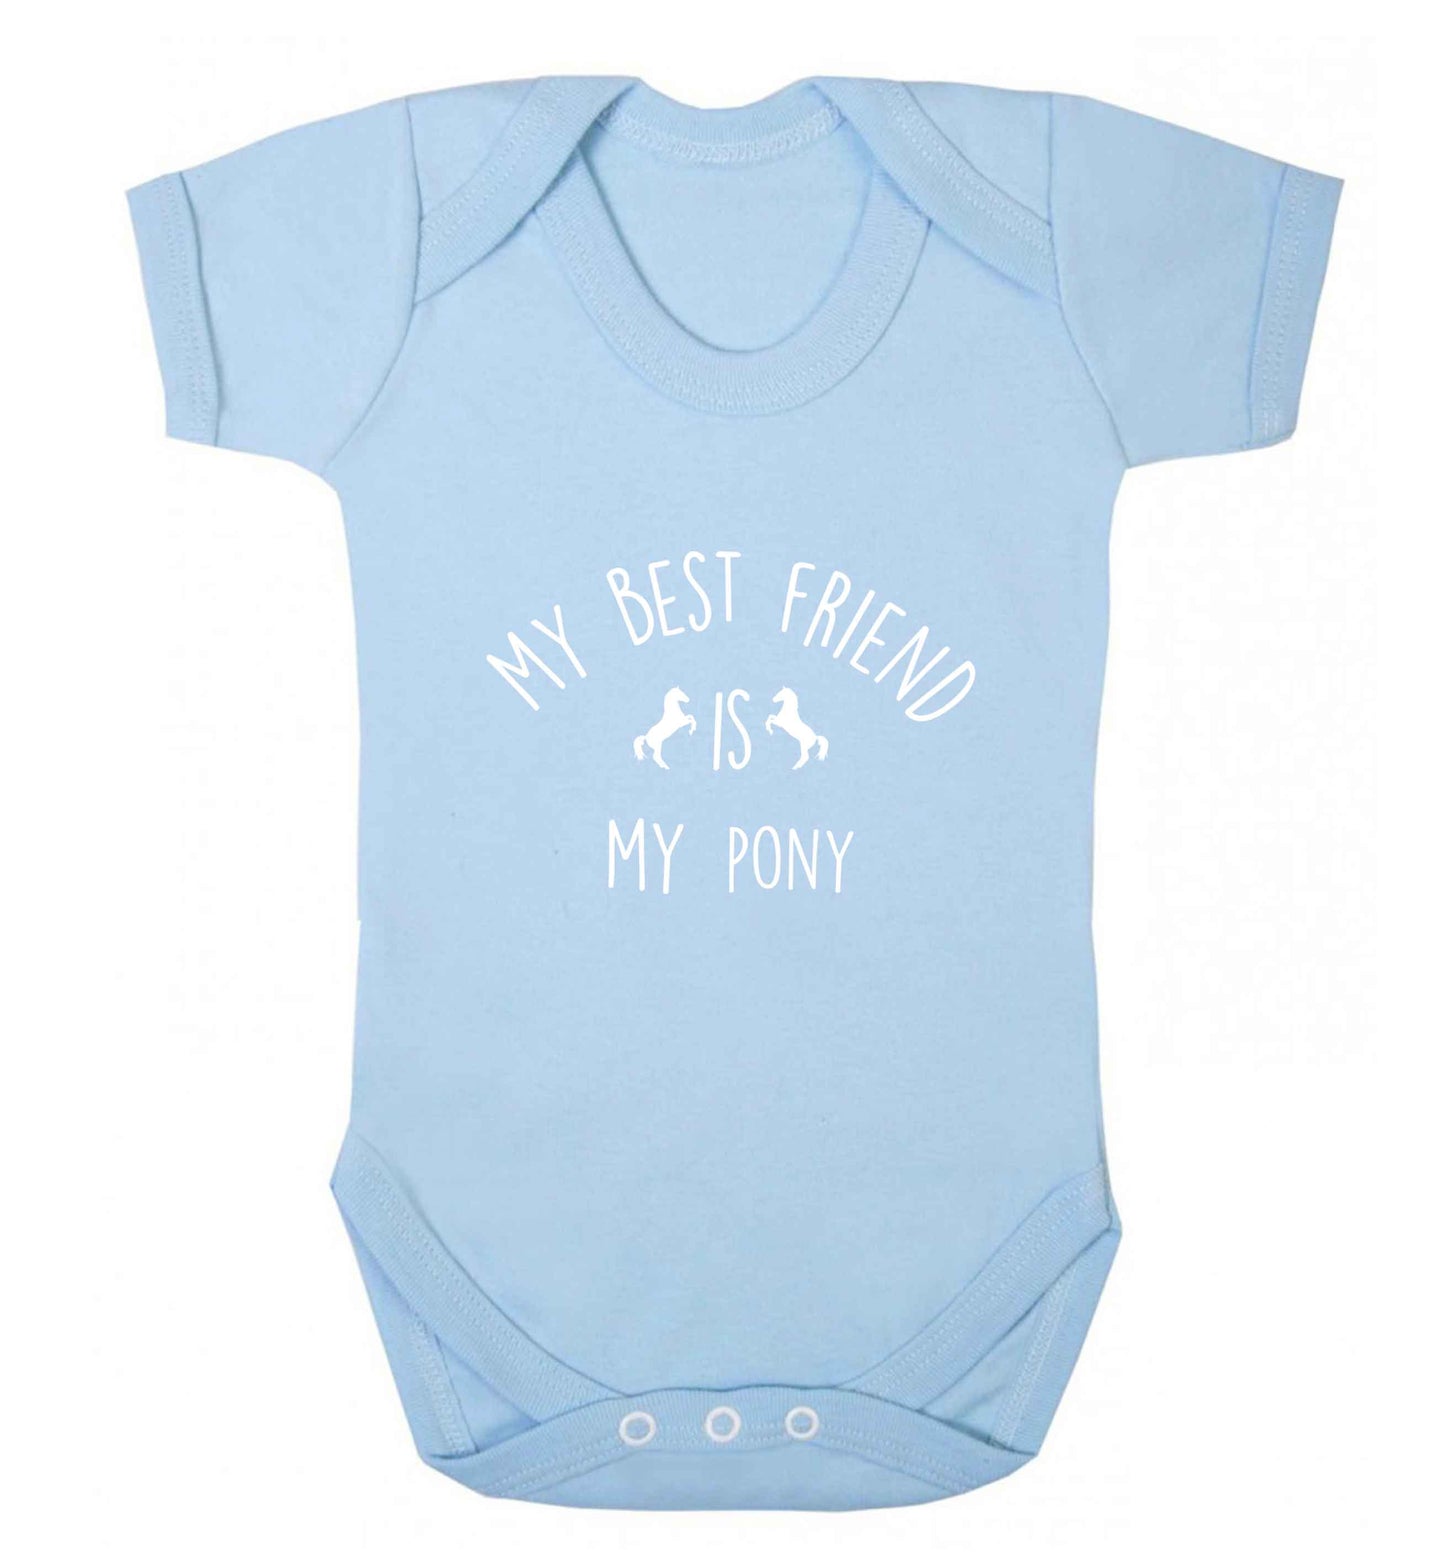 My best friend is my pony baby vest pale blue 18-24 months